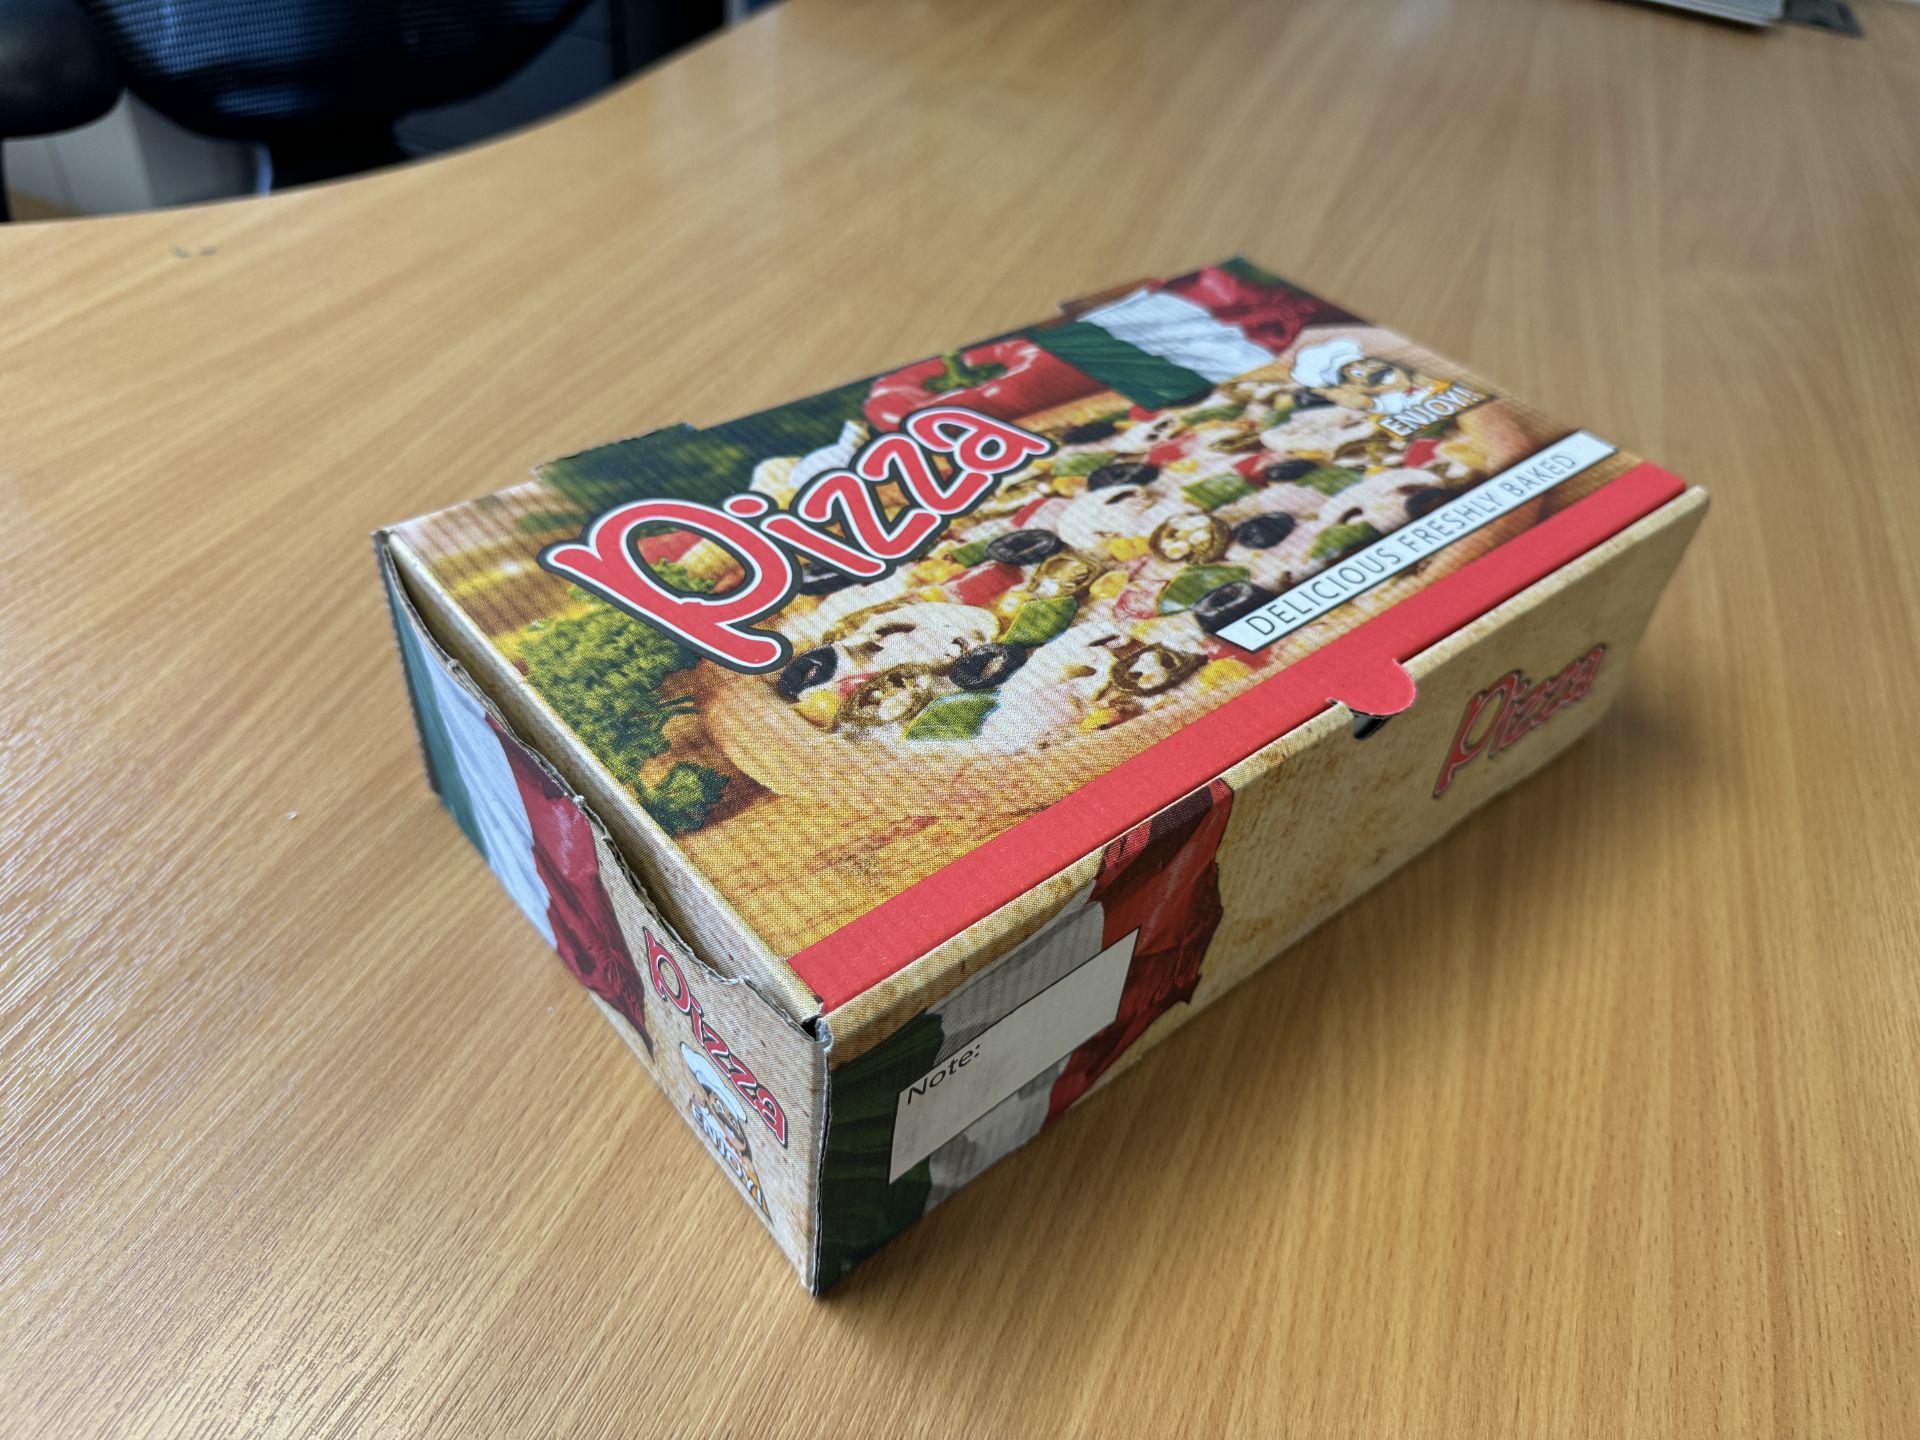 Circa 900 - Enjoy Calzone Boxes (Cardboard) - Multiple Uses RRP £130 - Image 2 of 12